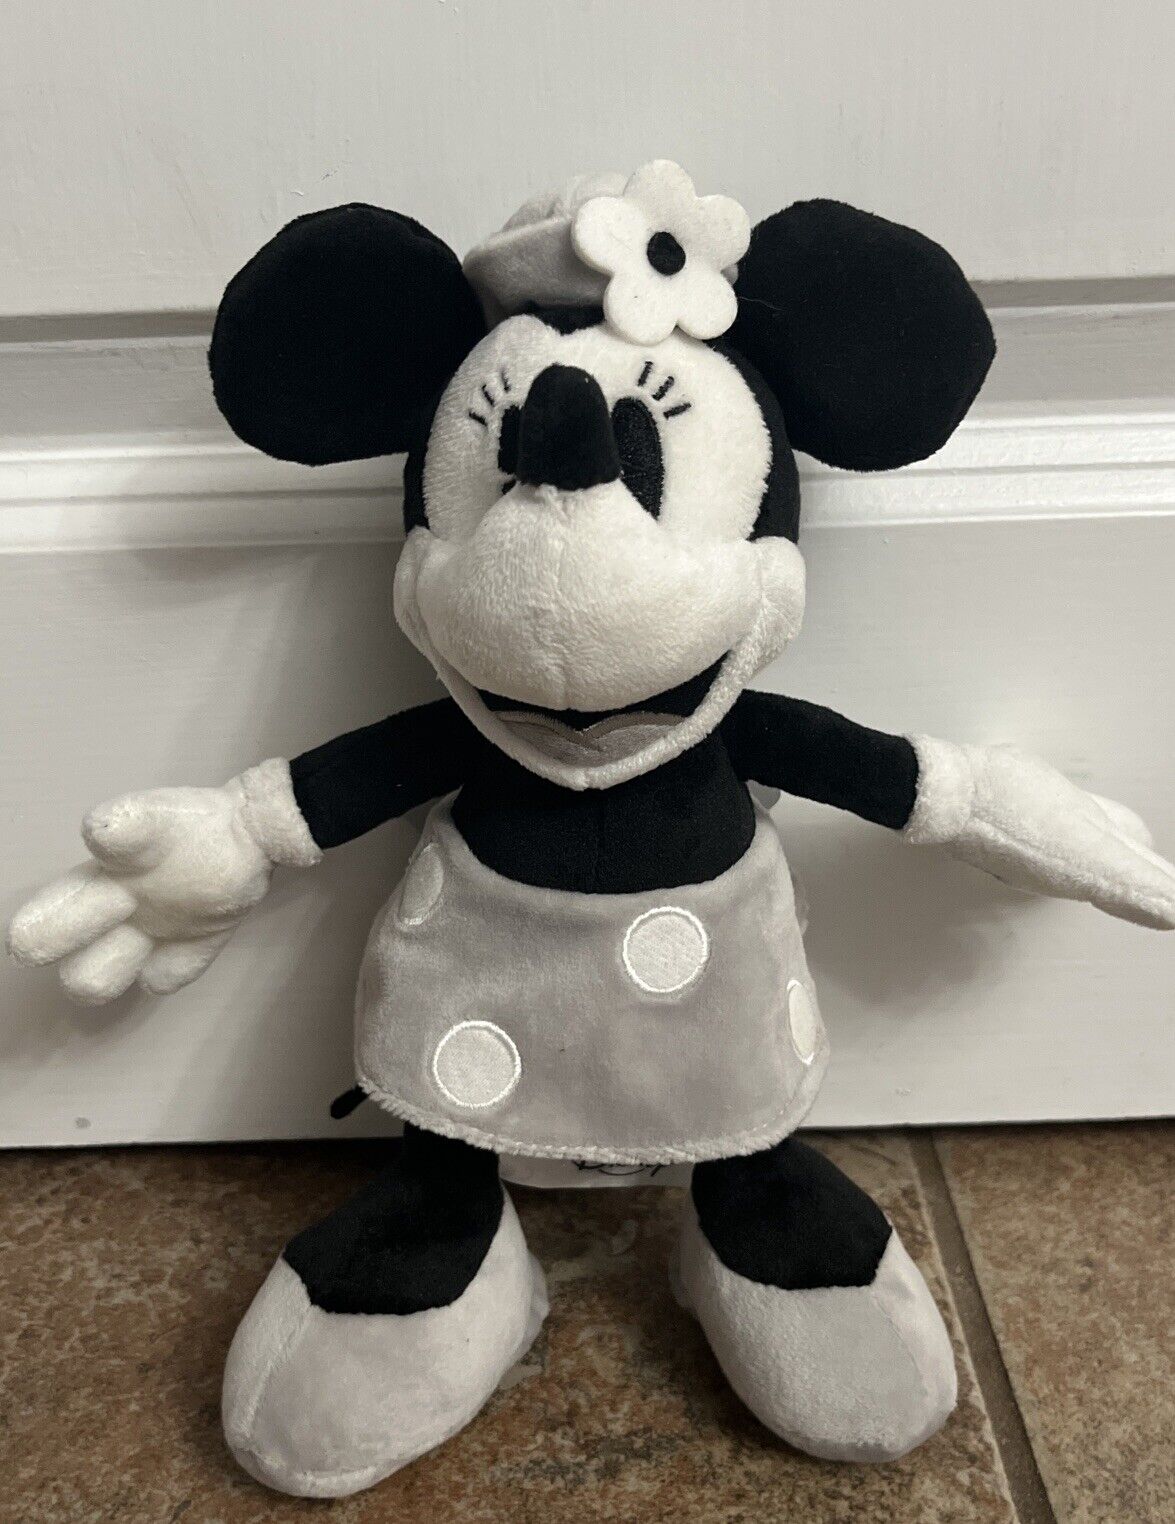 Disney Minnie Mouse Black and White Plush Toy 7” New With Tags Nwt